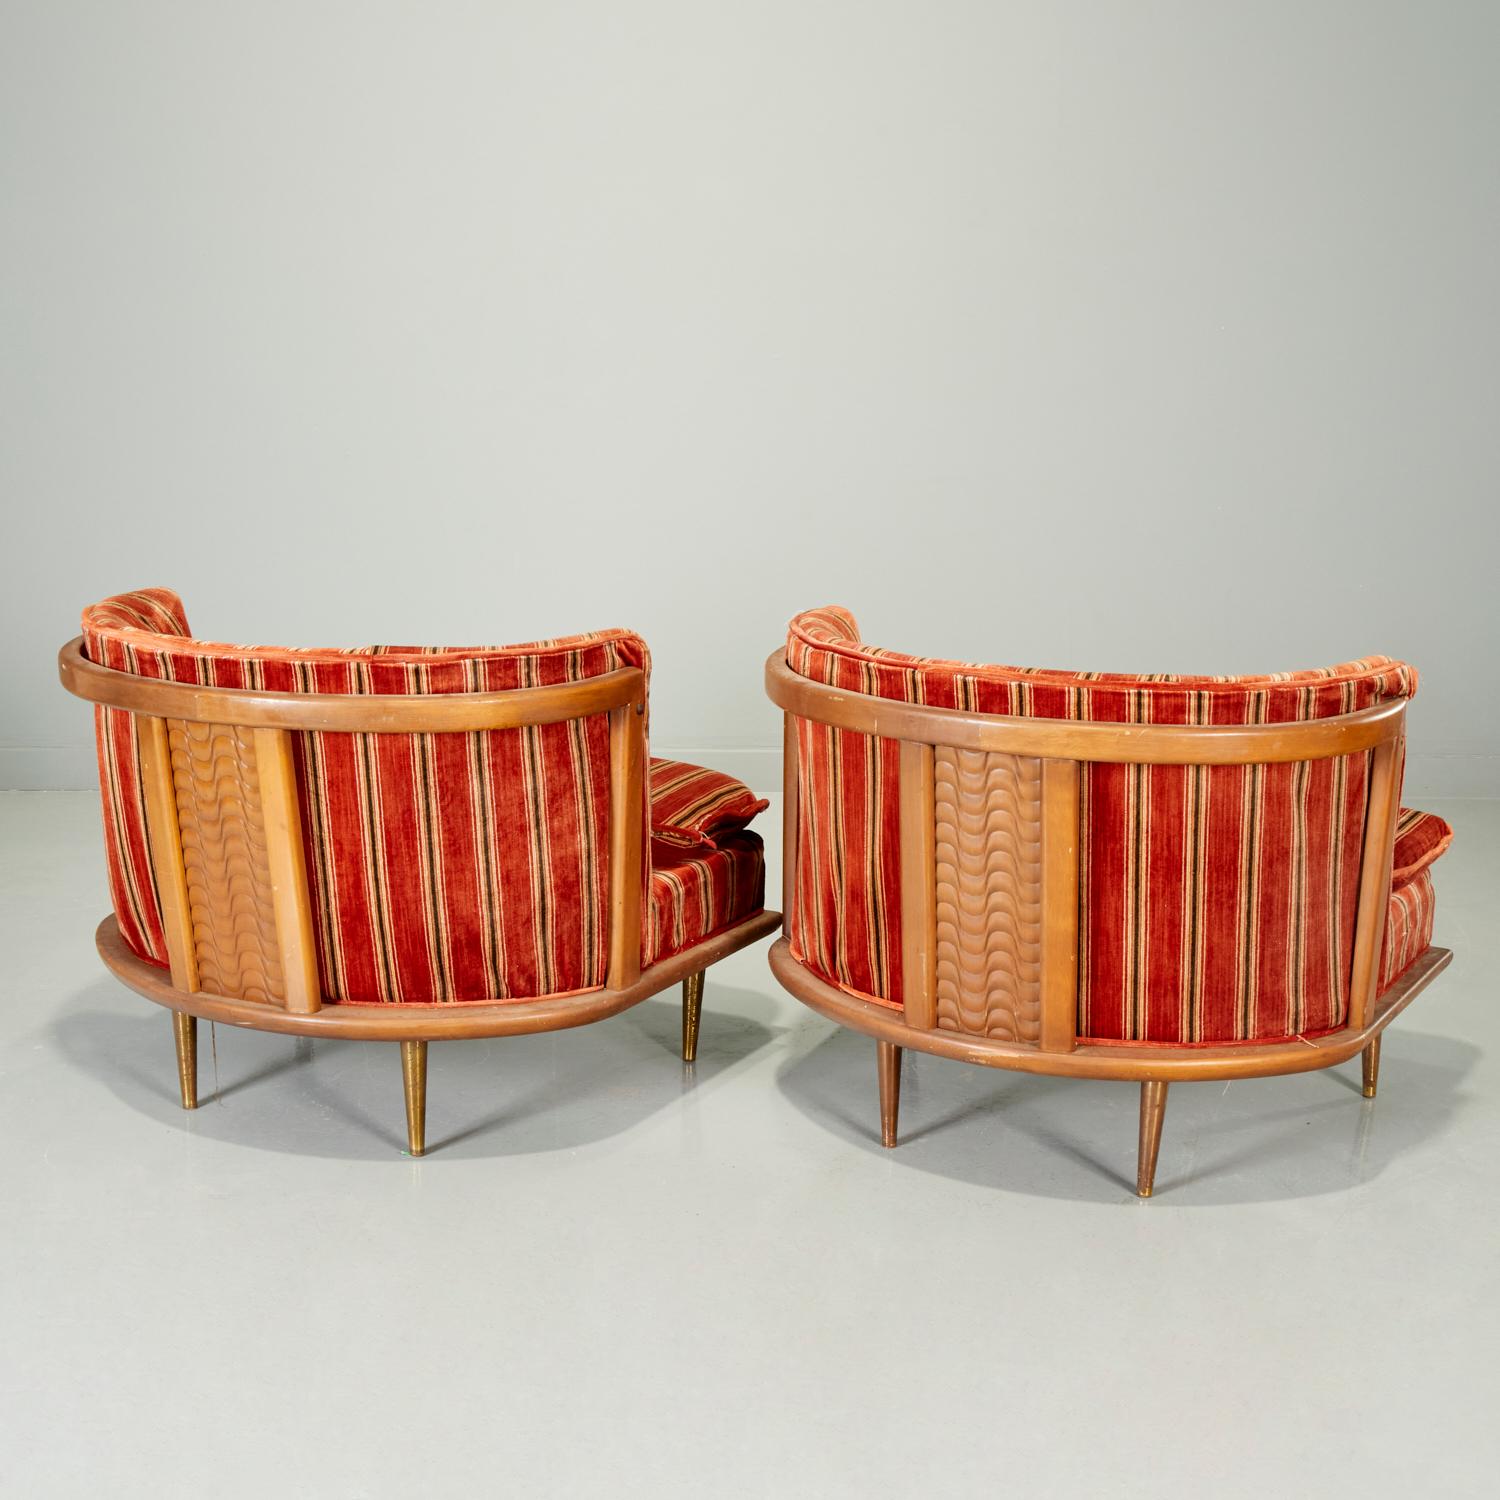 Hand-Crafted 1950's Tomlinson Slipper Chairs in Vibrant Striped Upholstery, a Pair